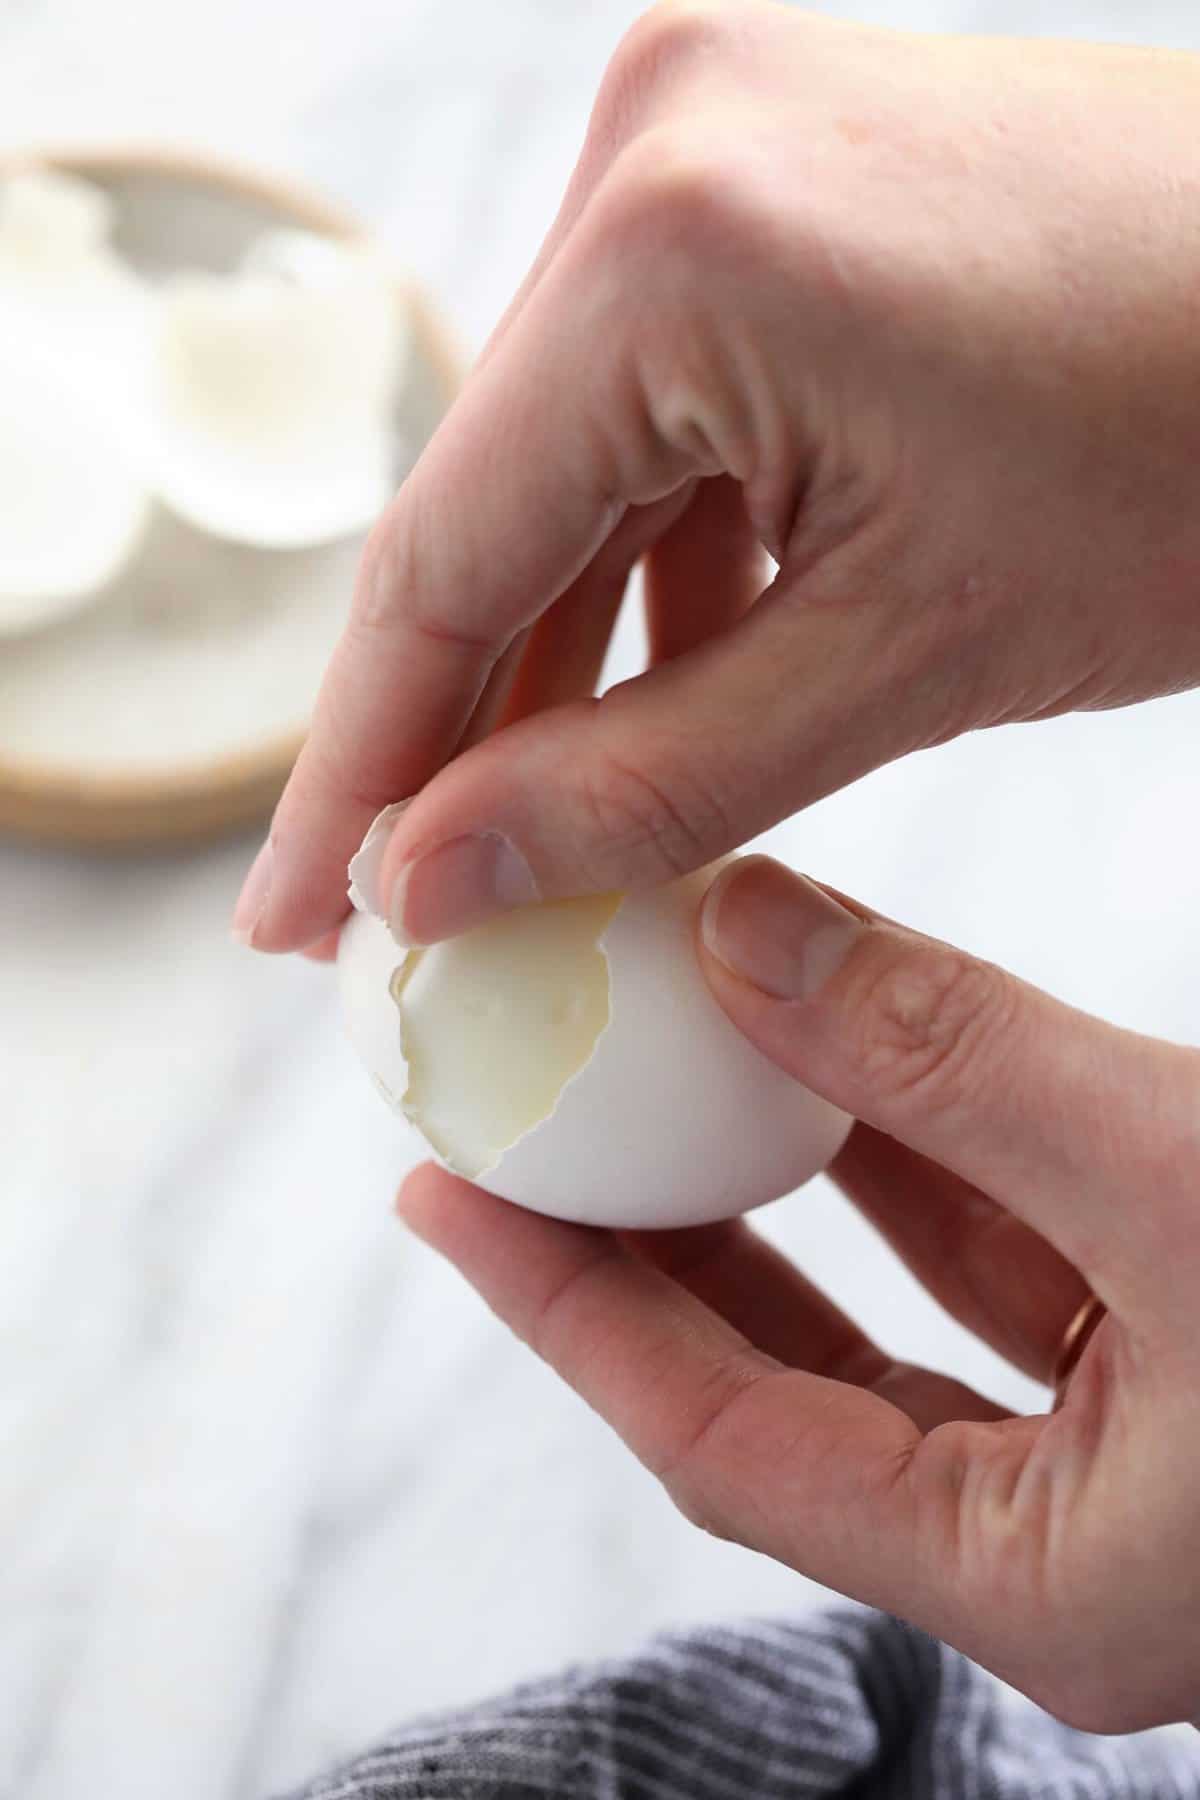 https://fitfoodiefinds.com/wp-content/uploads/2022/02/hard-boiled-eggs-6-1365x2048-1.jpg